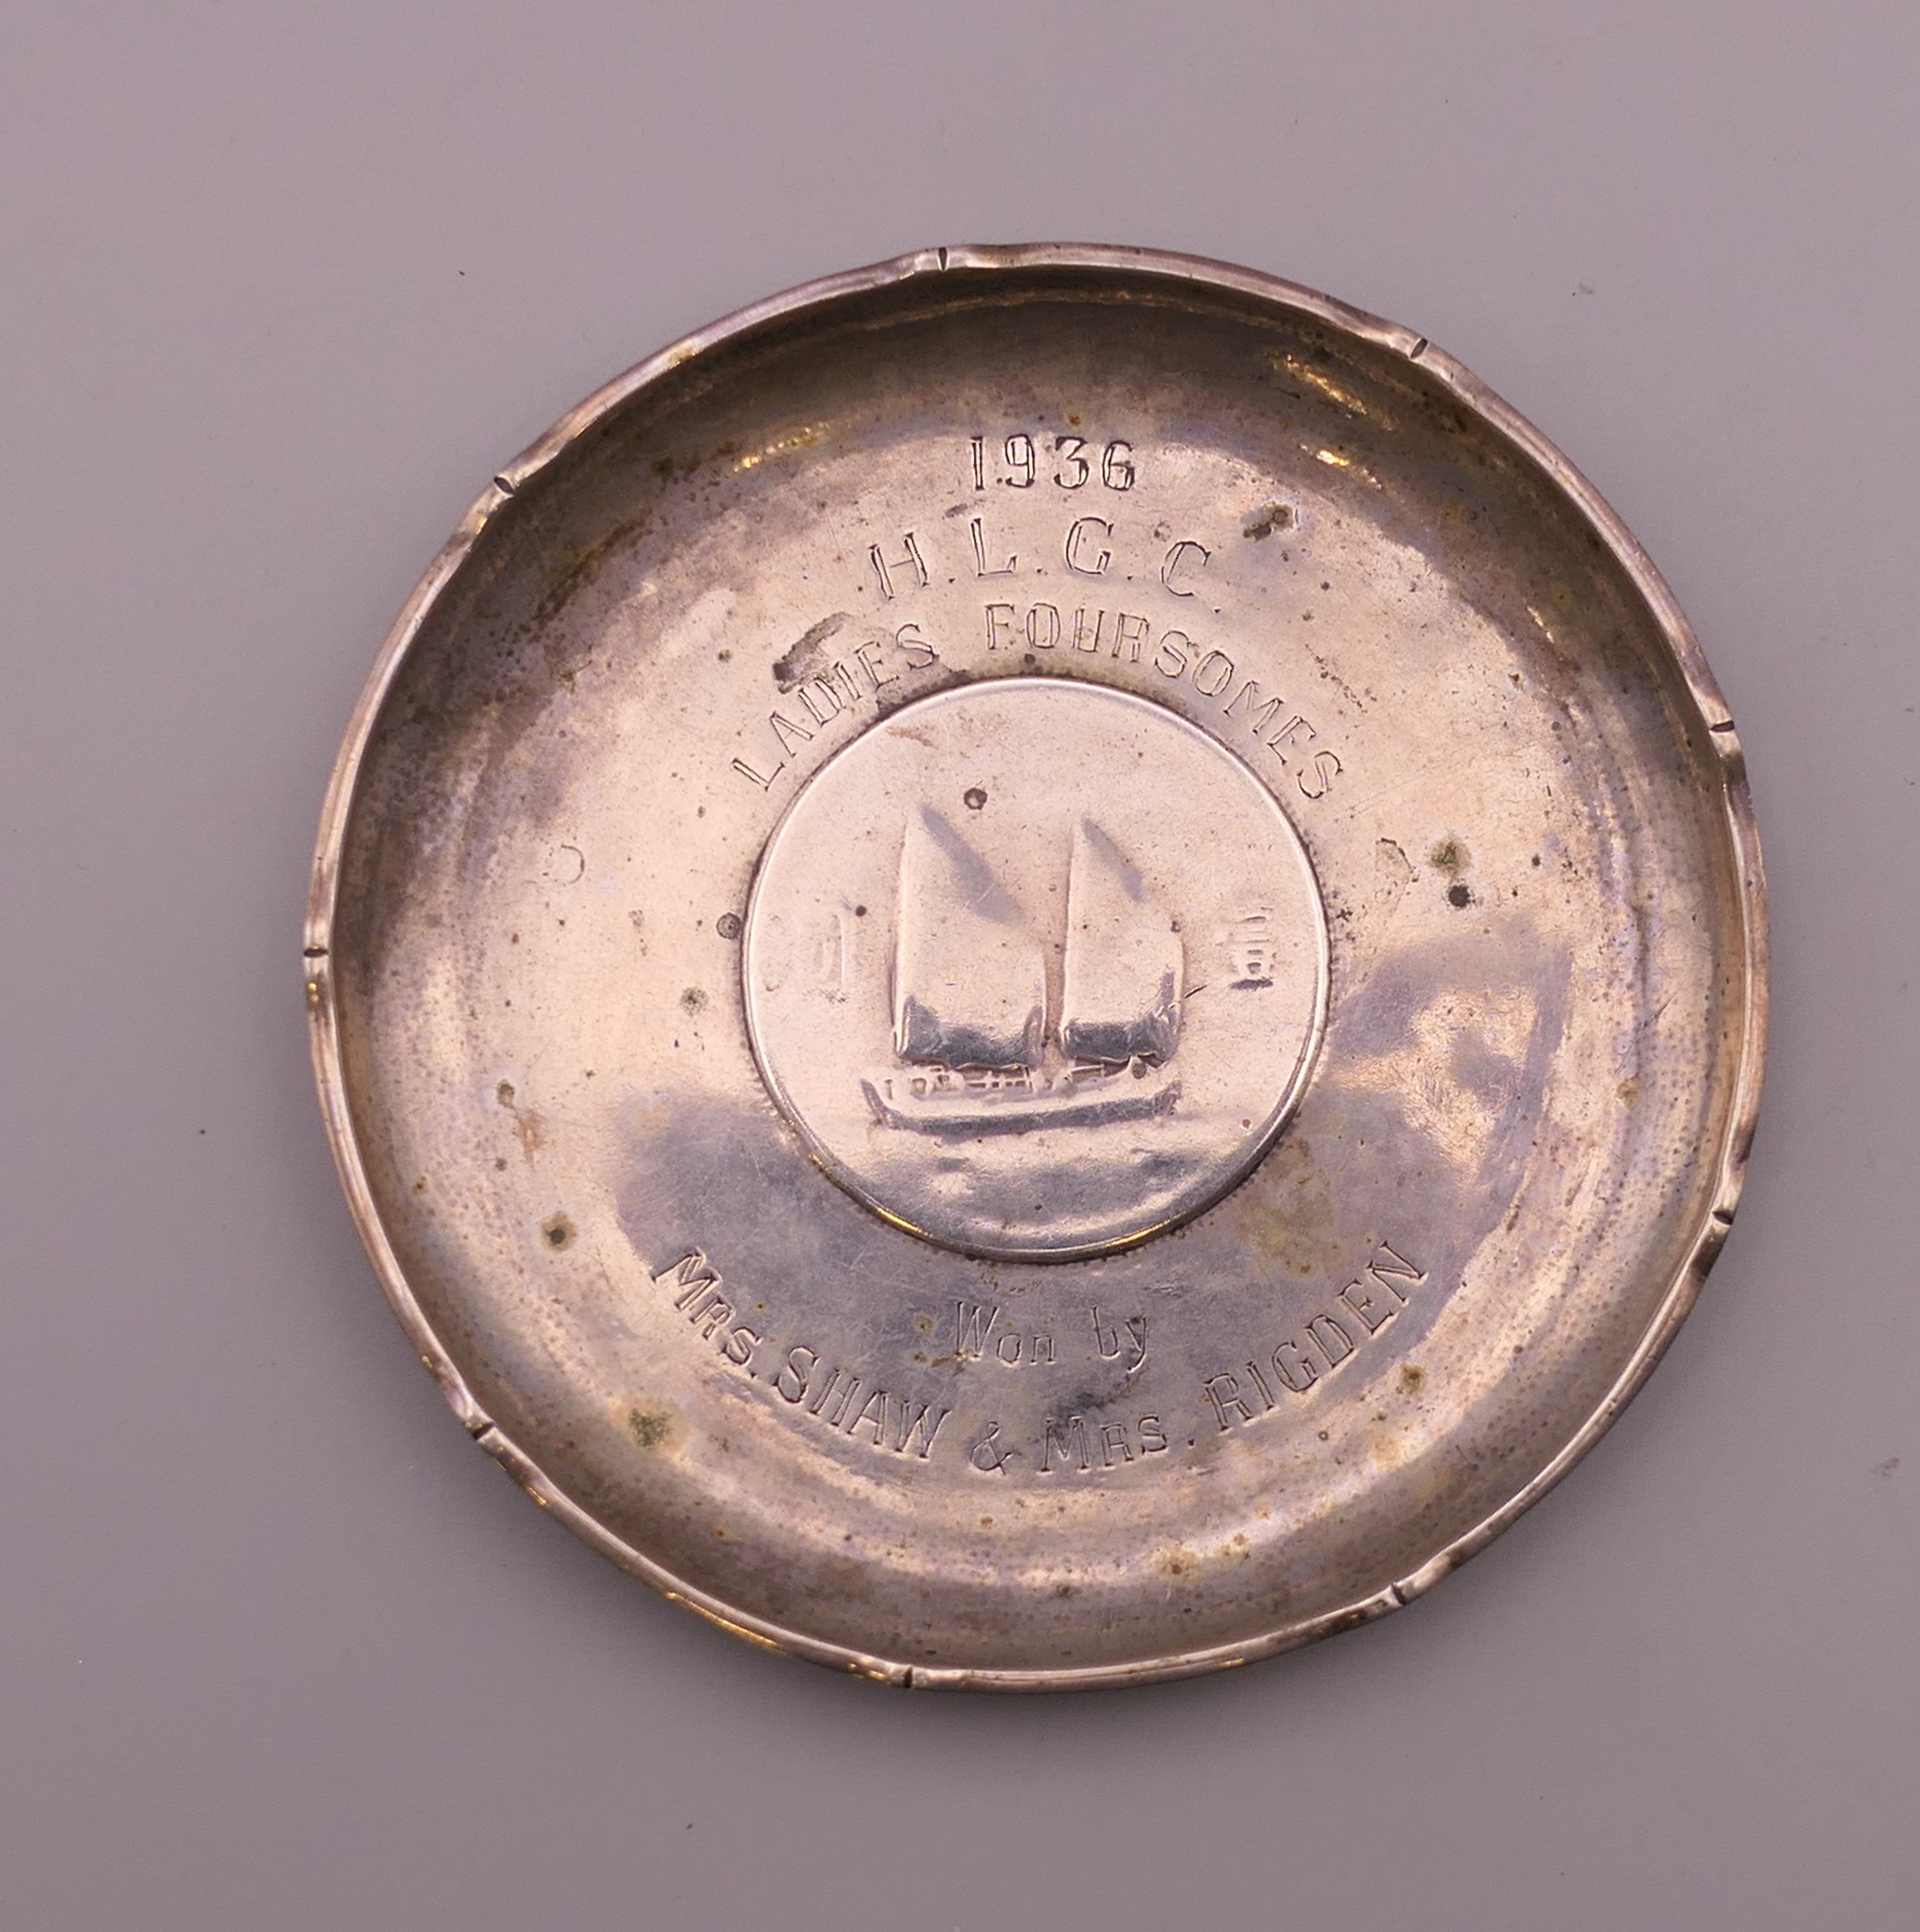 Two Chinese silver dishes inset with coins. 9.5 cm diameter. 117.9 grammes total weight. - Image 2 of 5